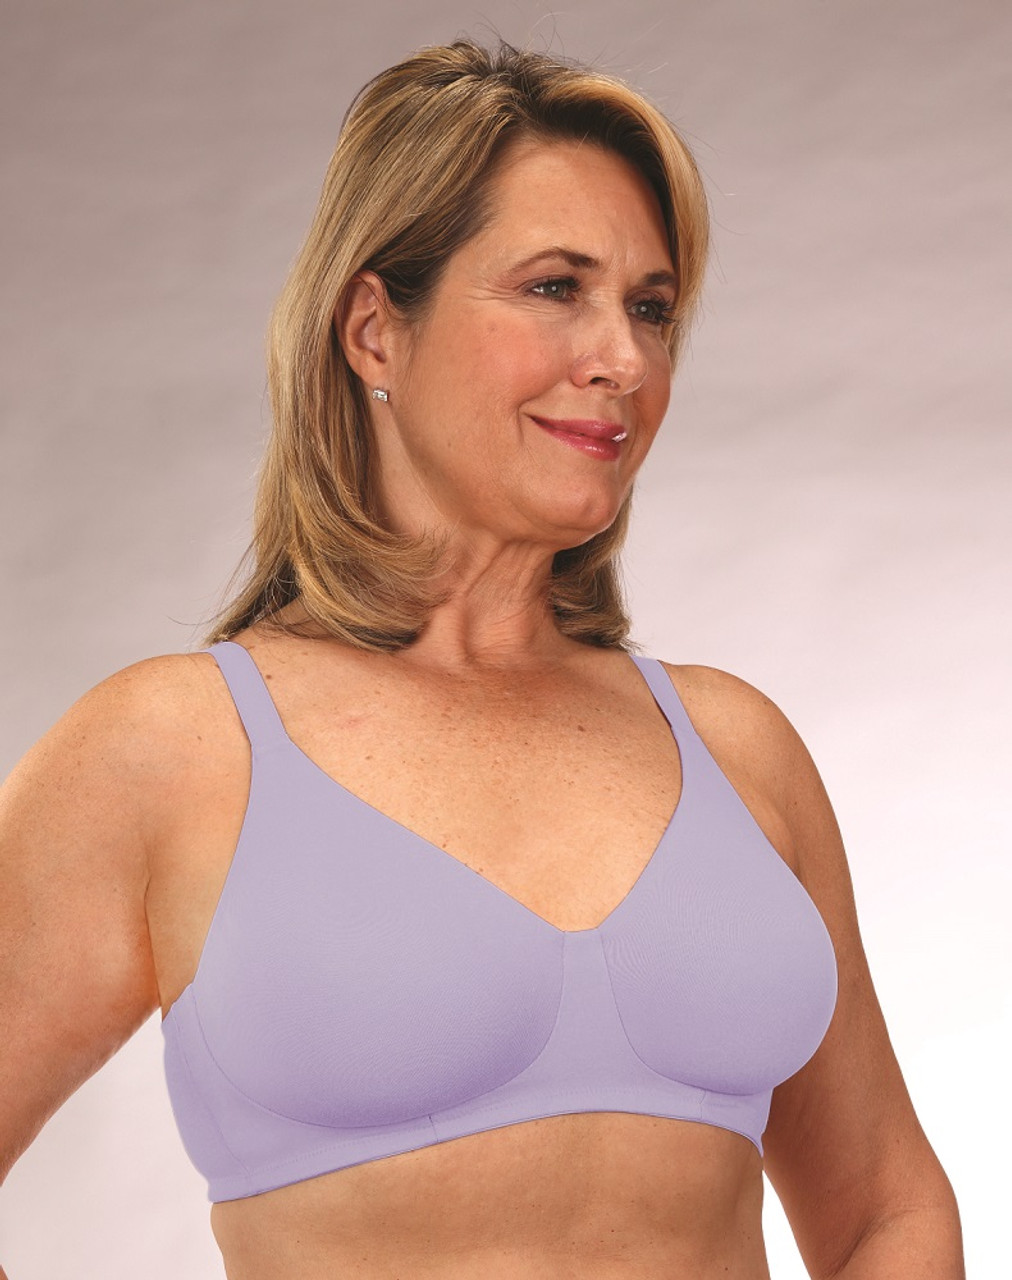 Post Breast Surgery High Cotton Content Seamless Bra - for Use